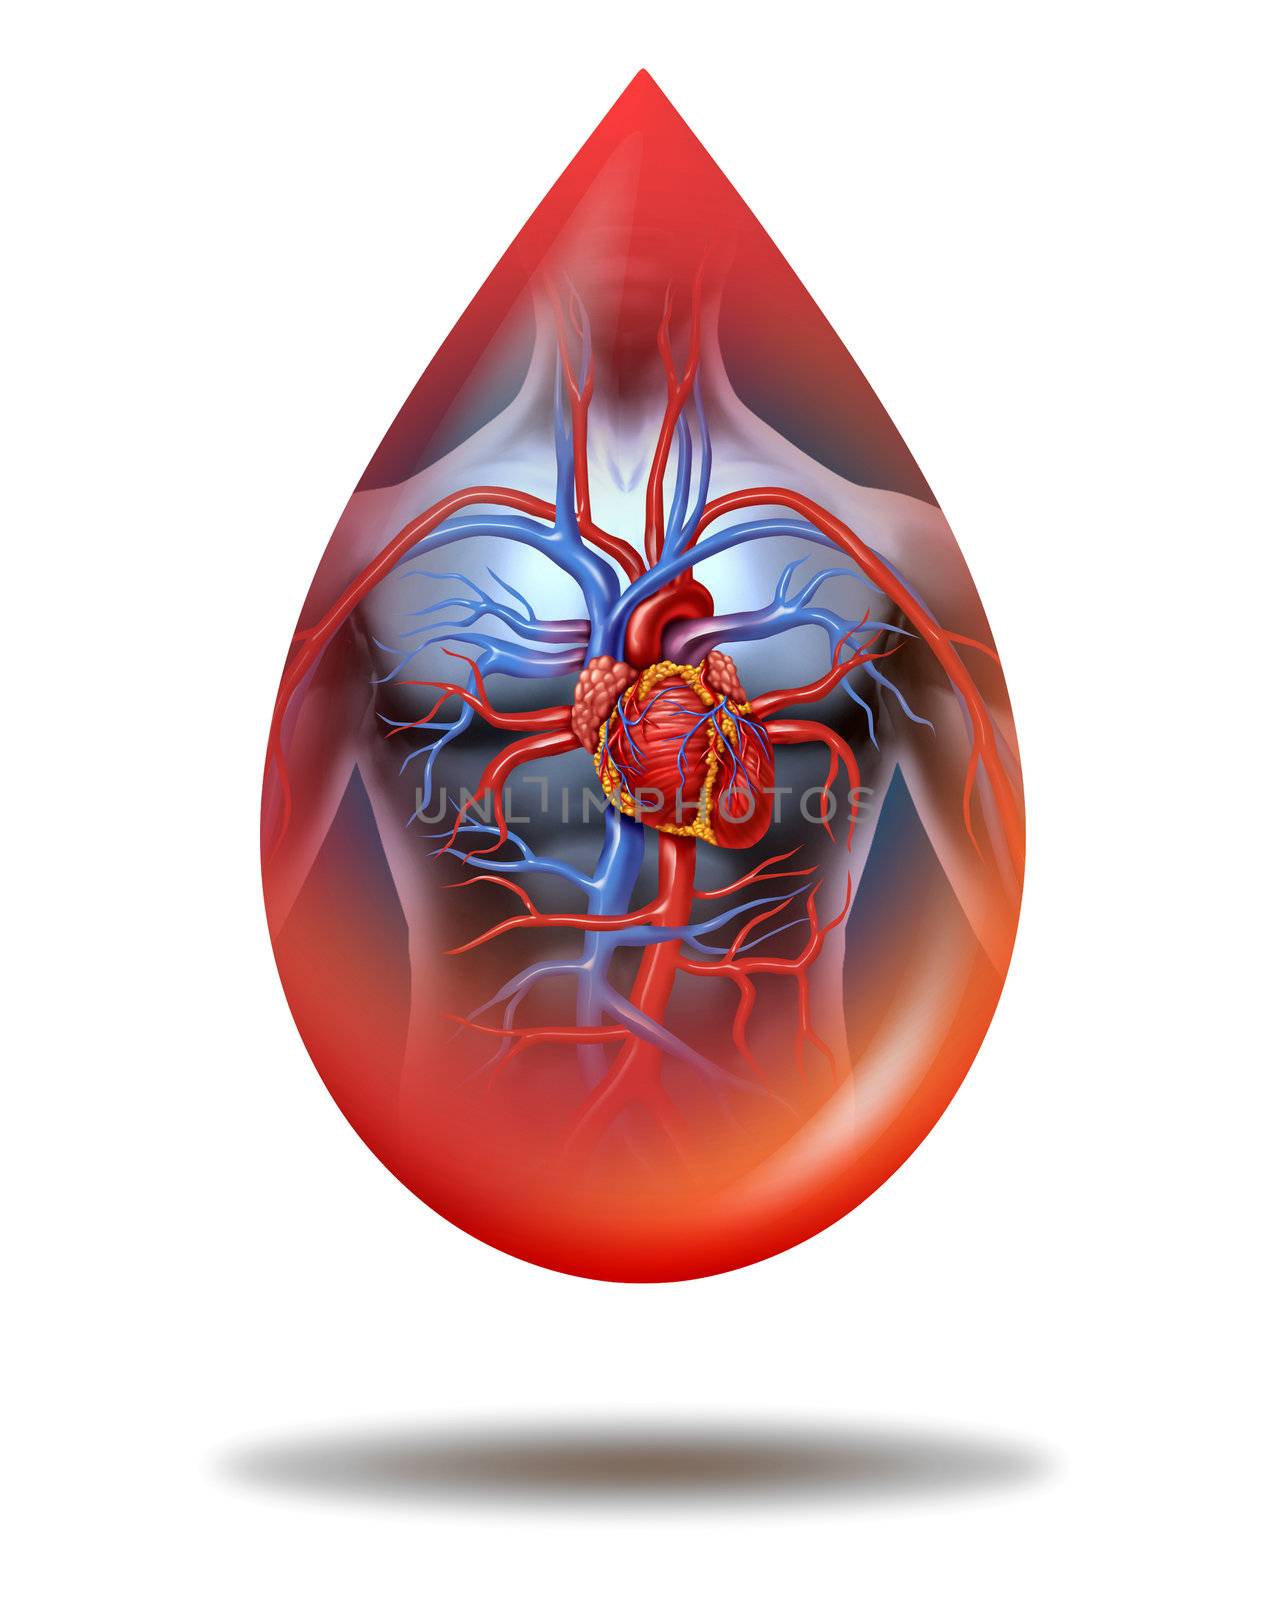 Human Heart Blood Drop by brightsource